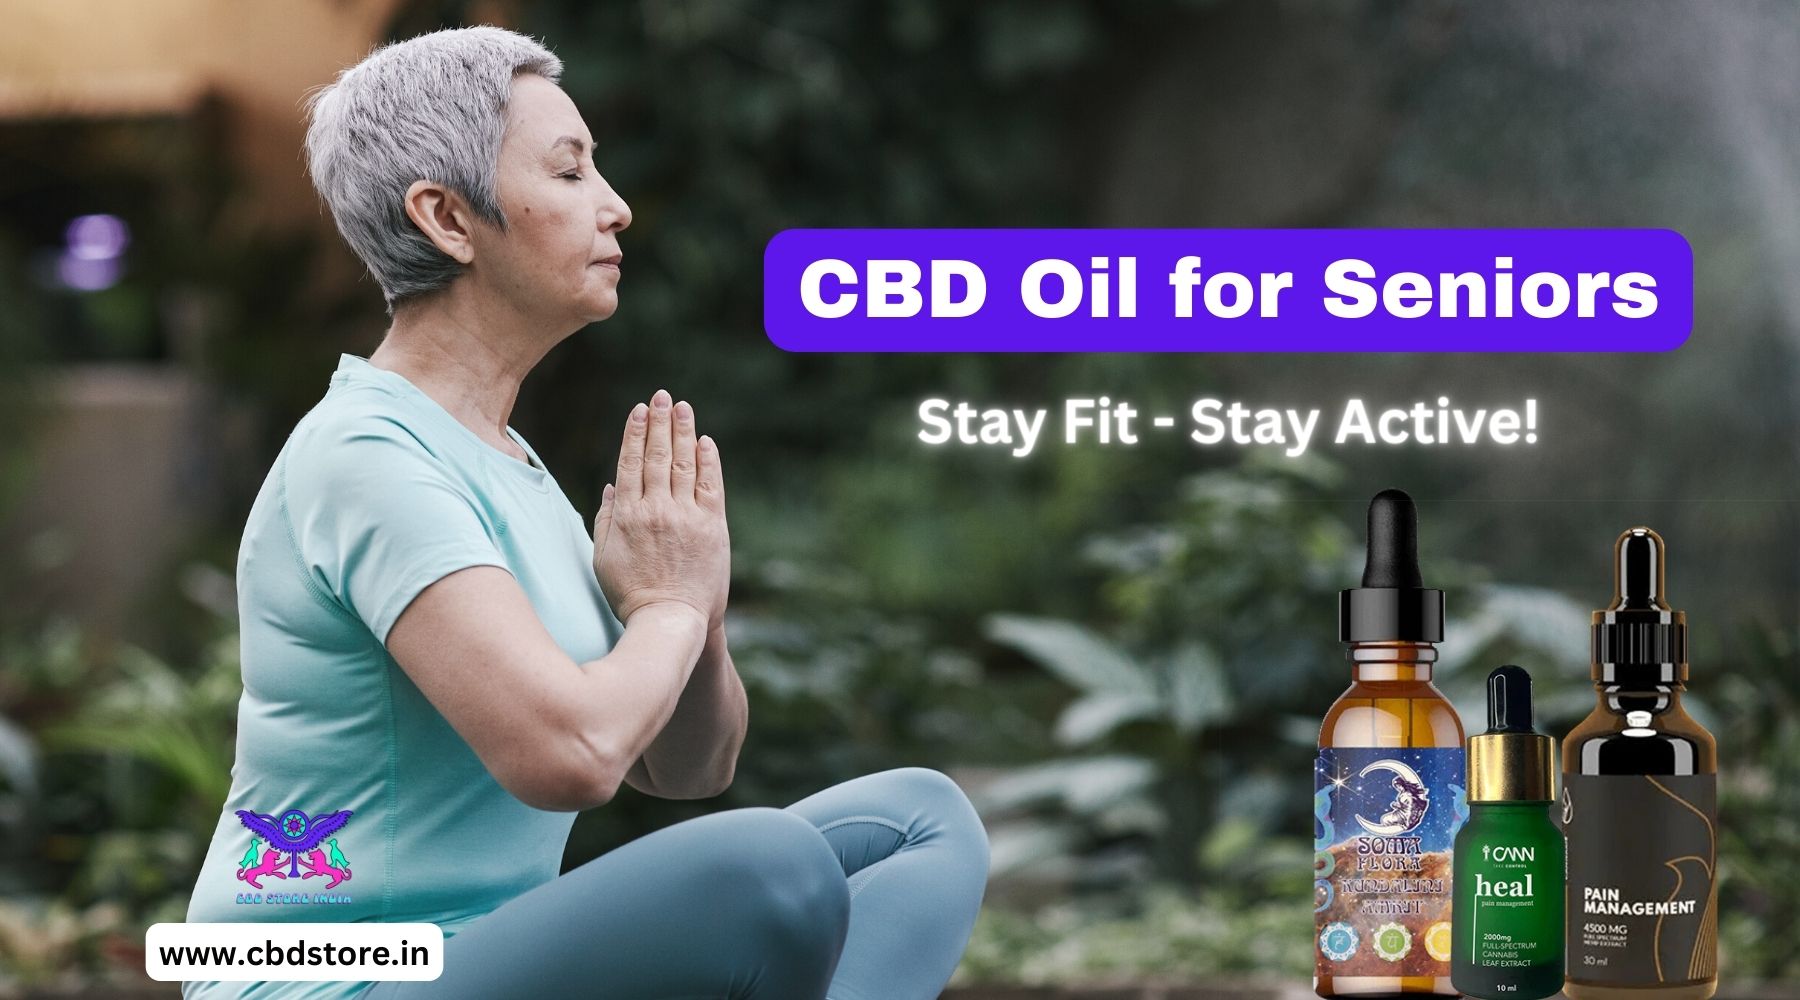 CBD Oil for Seniors: How cannabidiol can help senior citizens stay fit and healthy - CBD Store India